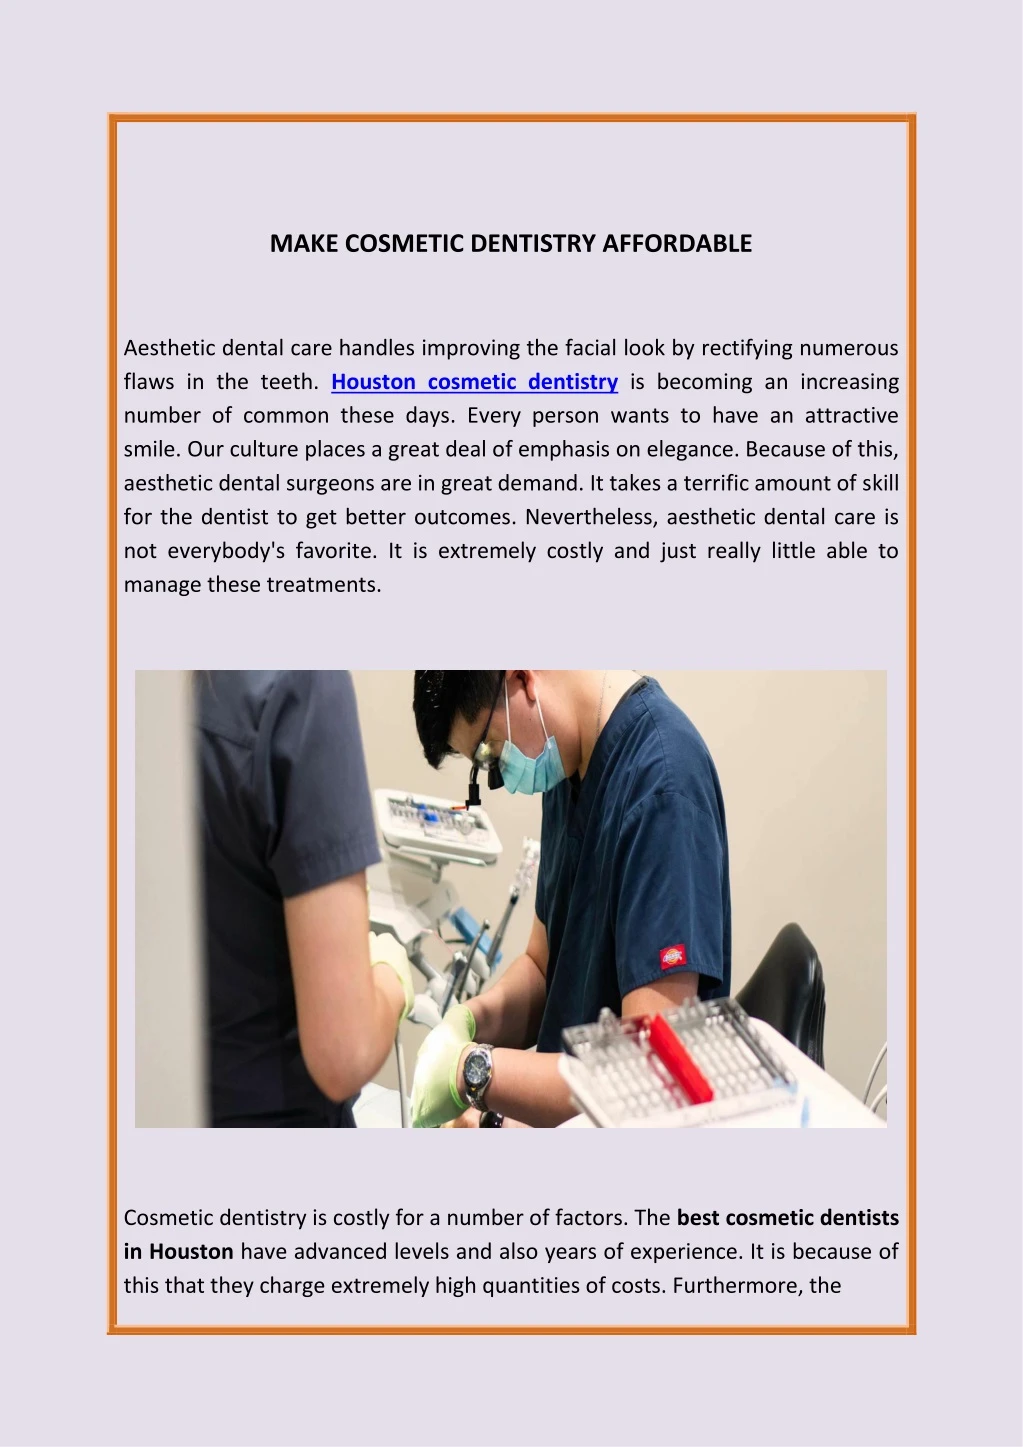 make cosmetic dentistry affordable